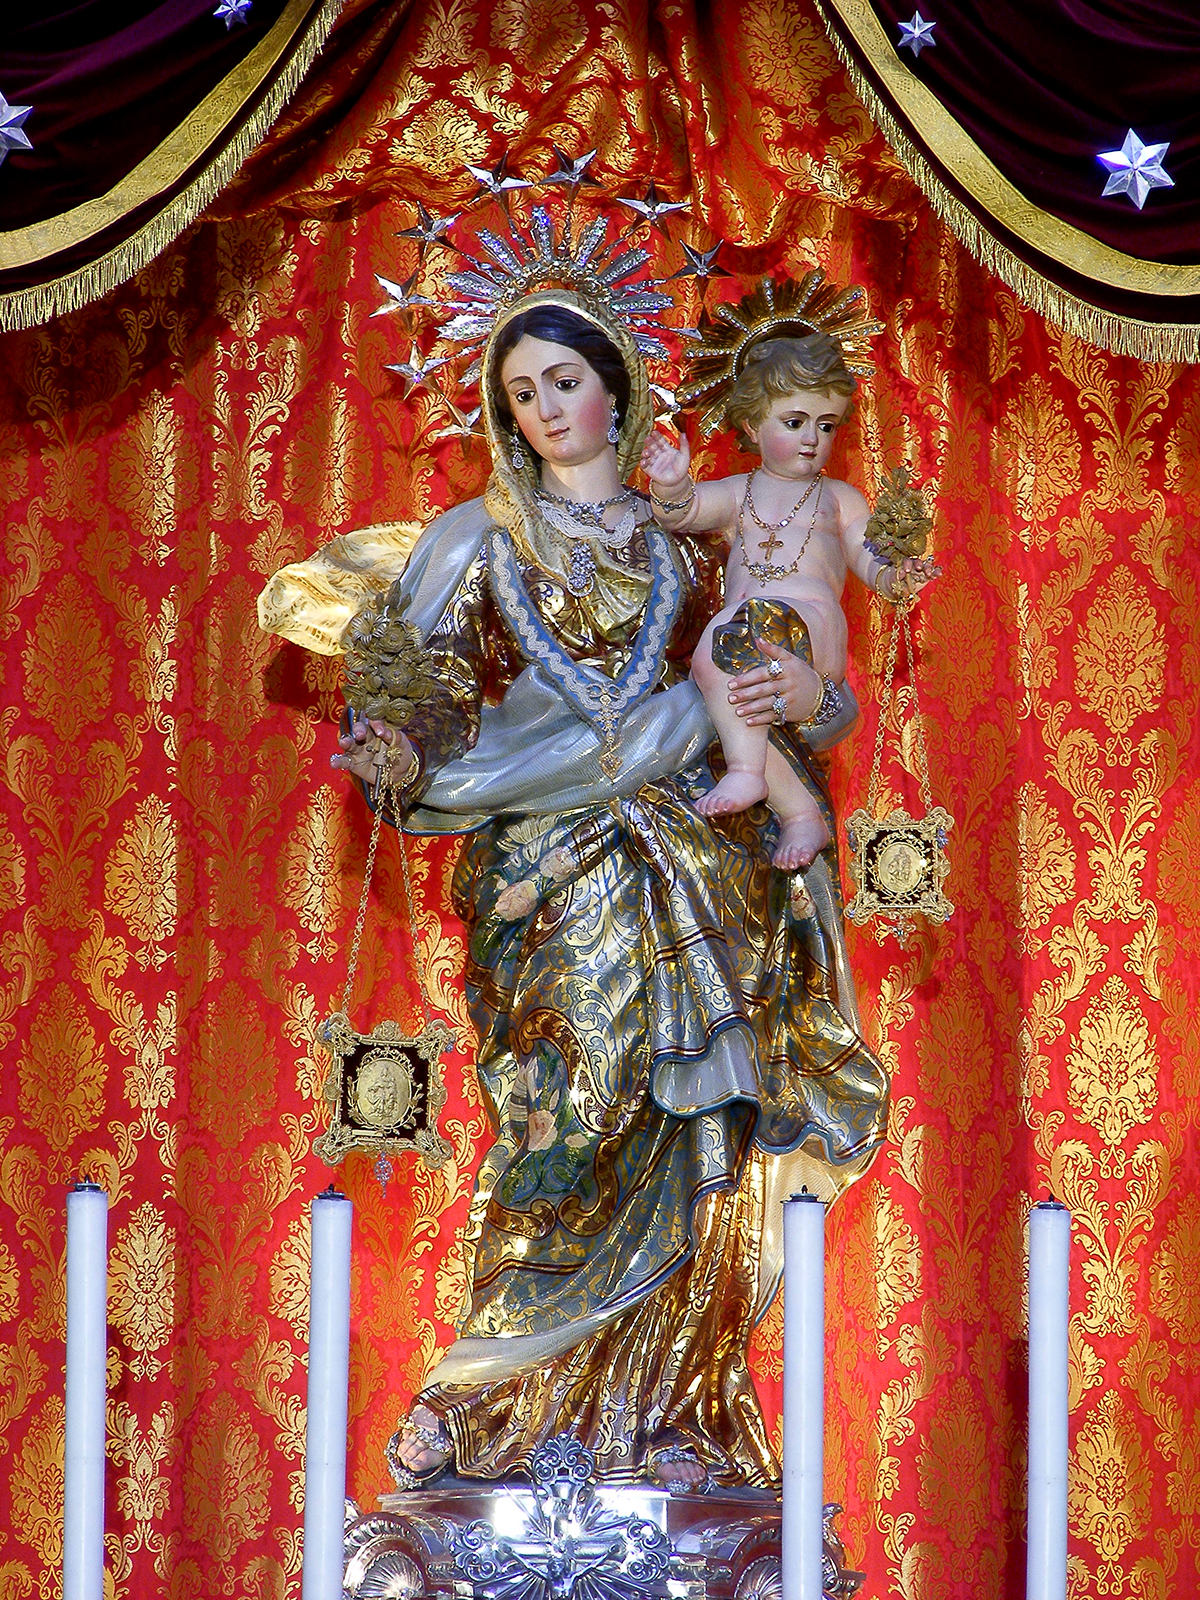 Our Lady of Mount Carmel in the Maltese Islands